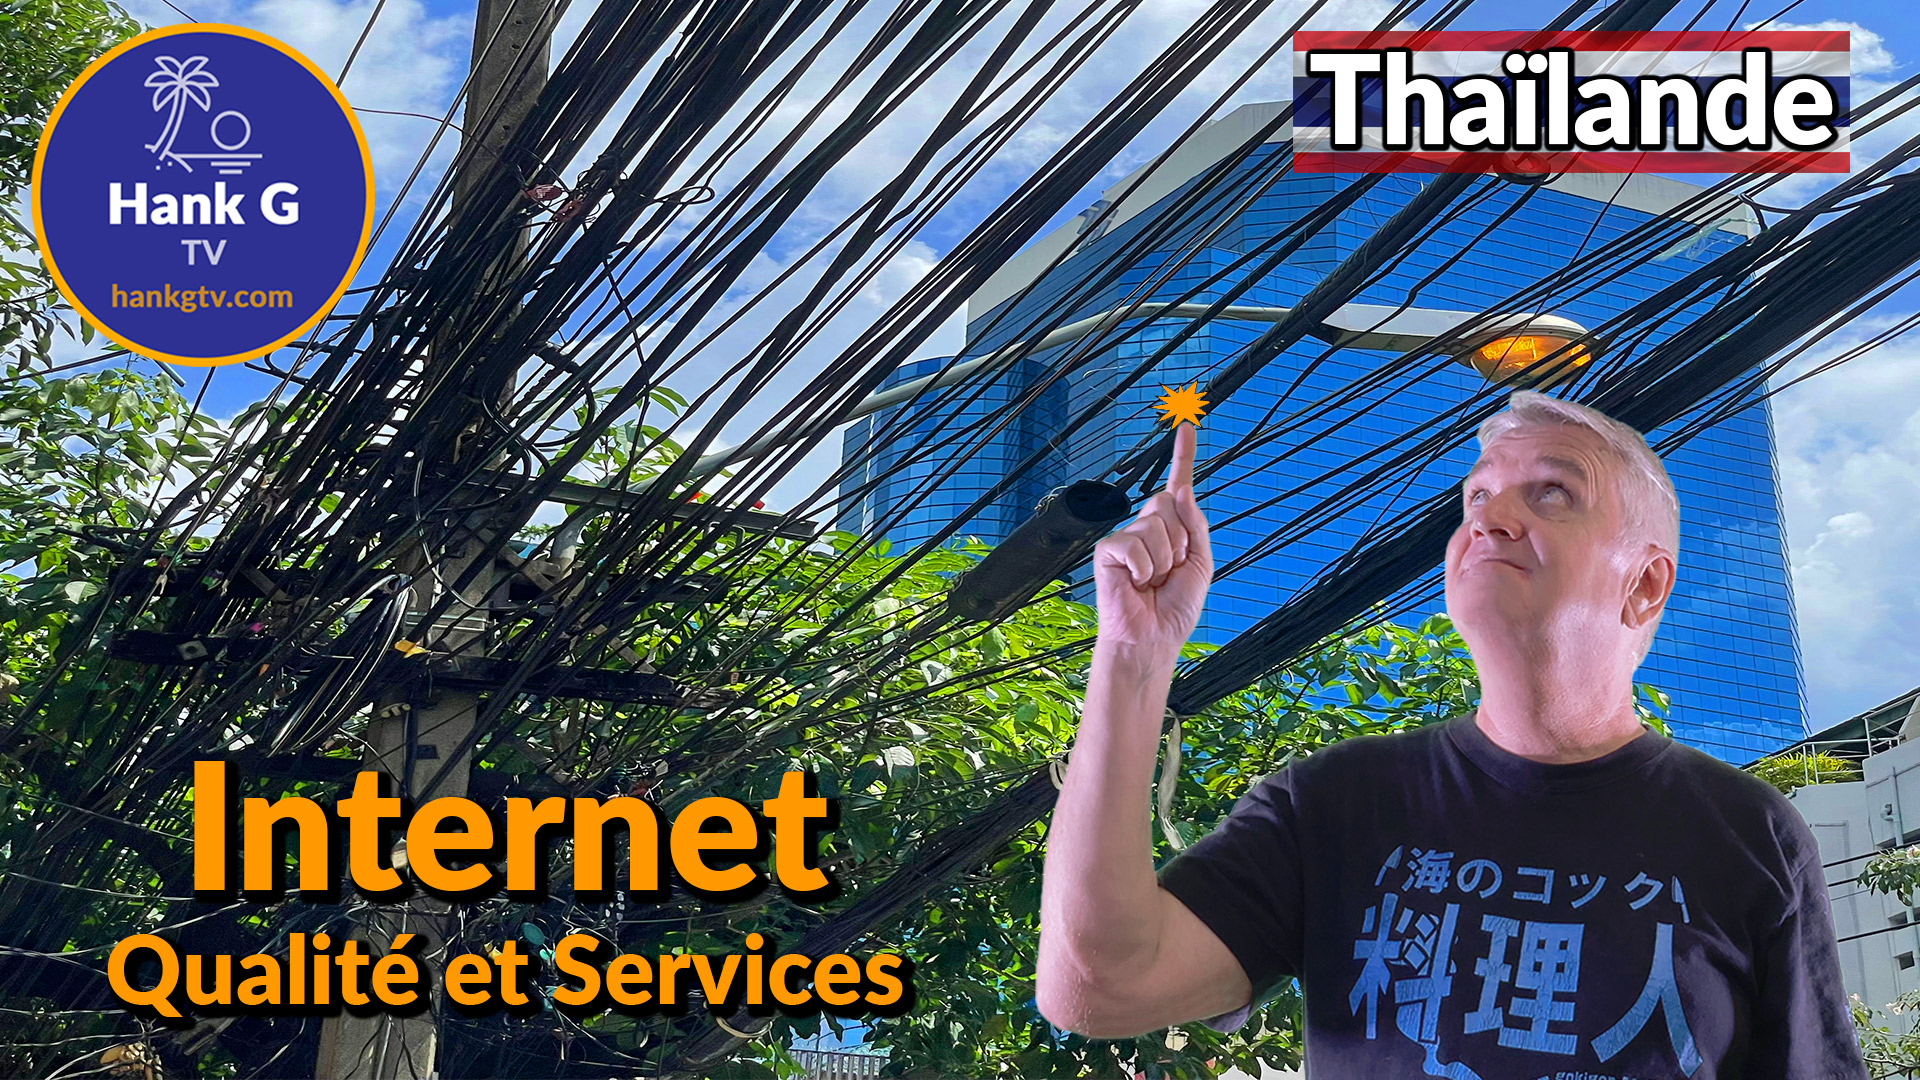 Internet - Quality and Services